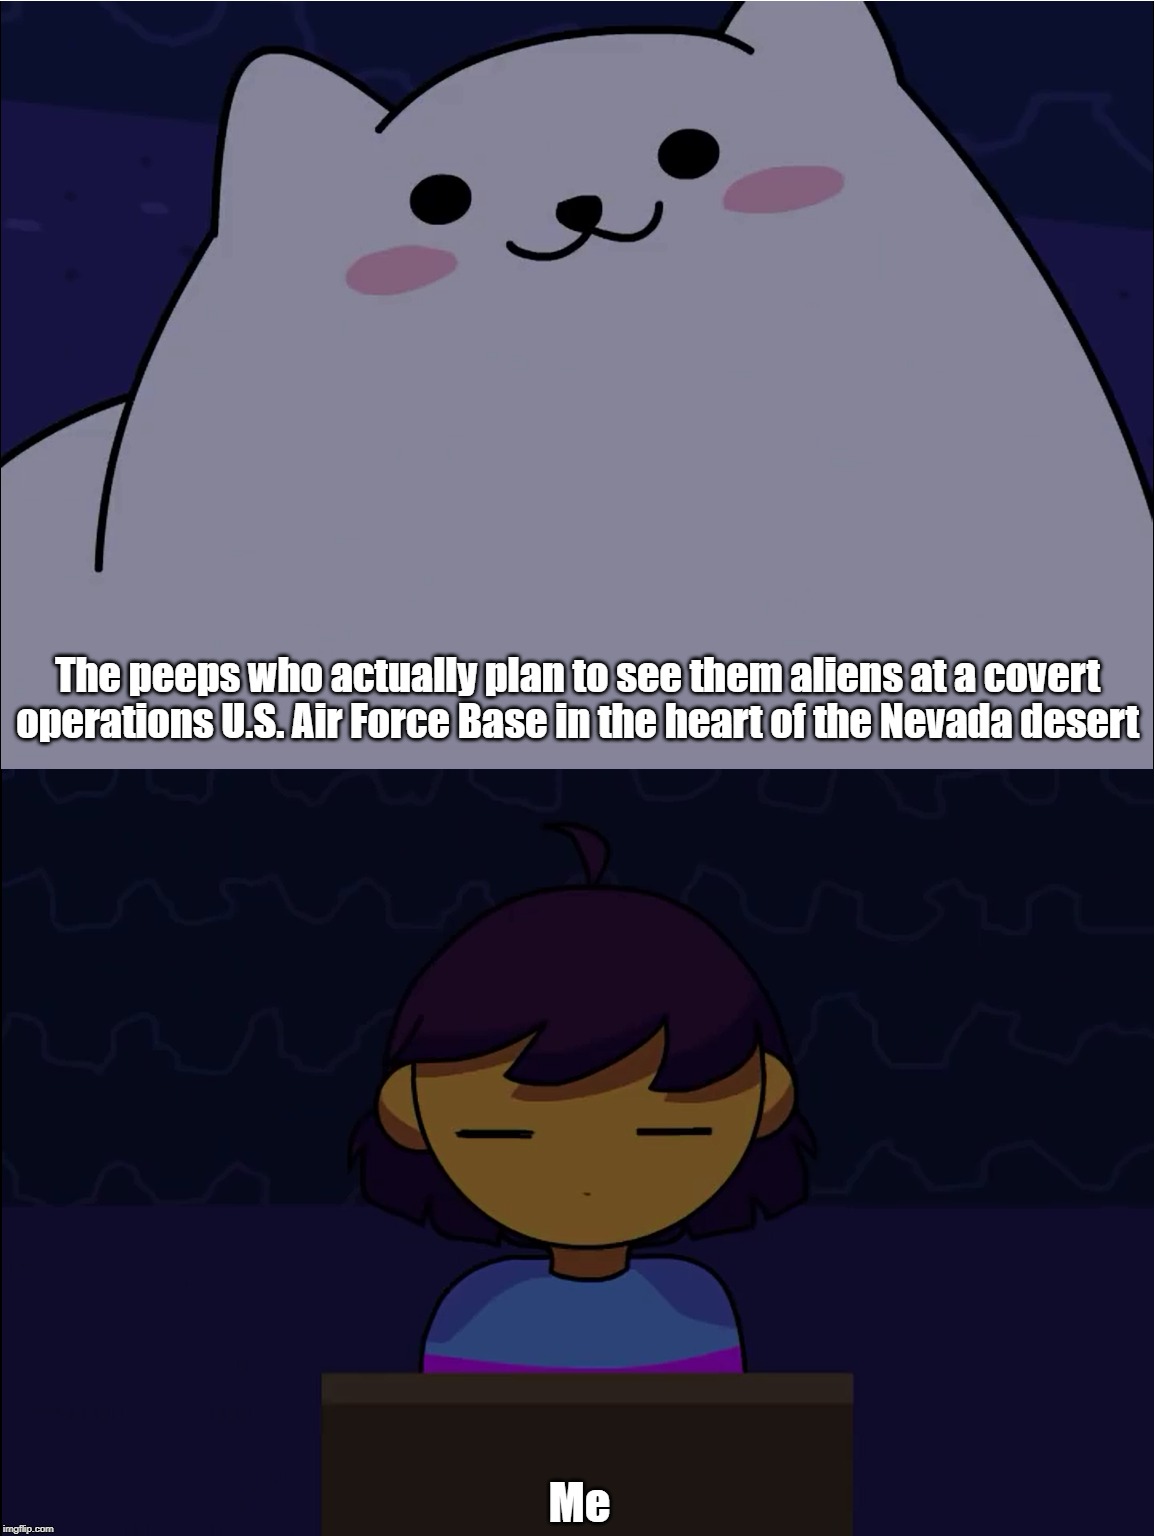 Human and the Annoying Dog | The peeps who actually plan to see them aliens at a covert operations U.S. Air Force Base in the heart of the Nevada desert; Me | image tagged in human and the annoying dog | made w/ Imgflip meme maker